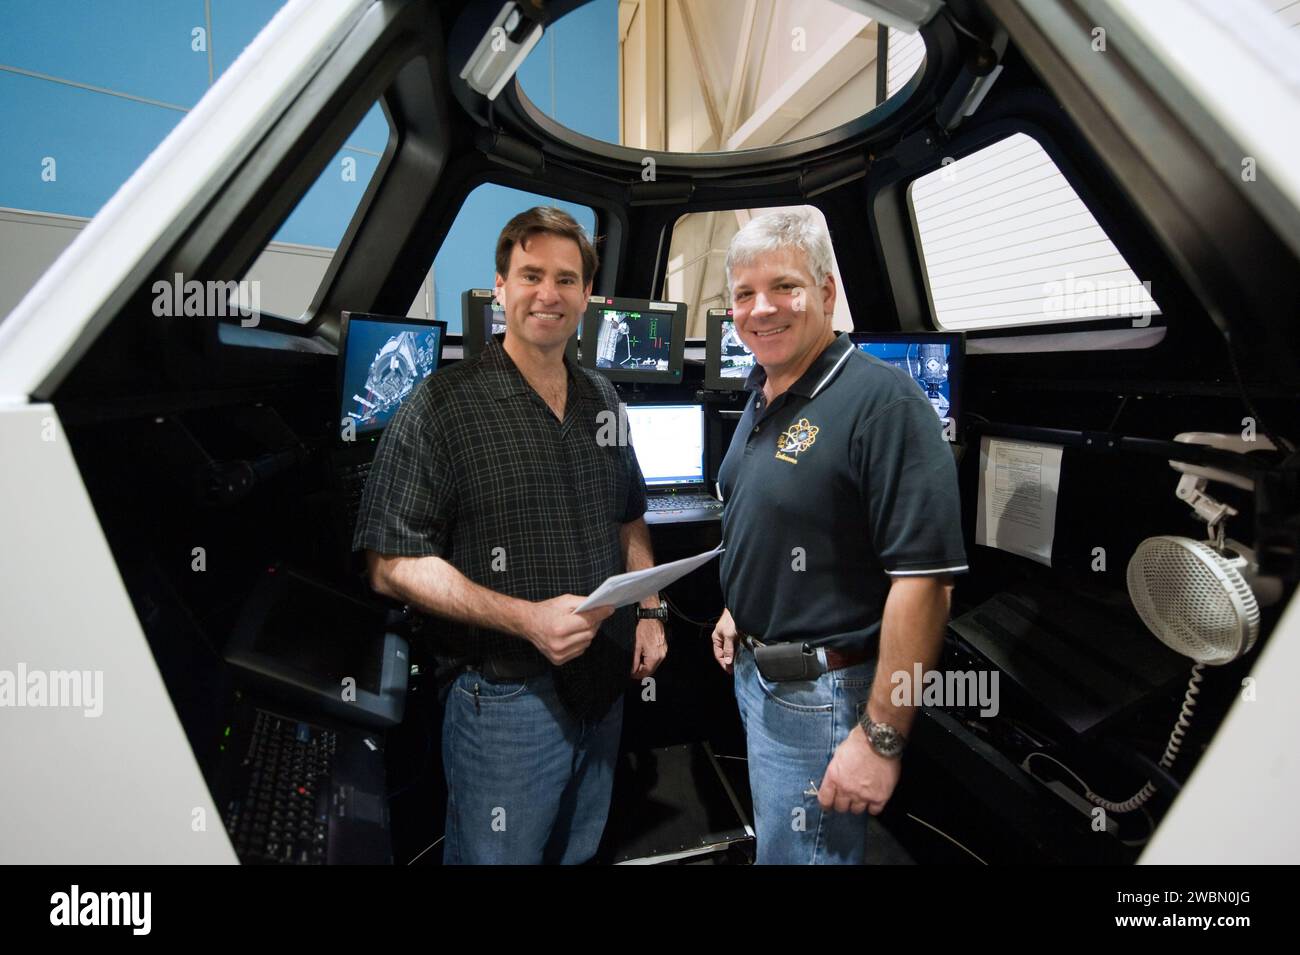 JSC2011-E-028160 (23 March 2011) --- NASA astronauts Greg H. Johnson (right), STS-134 pilot; and Greg Chamitoff, mission specialist, are pictured during an exercise in the systems engineering simulator in the Avionics Systems Laboratory at NASA's Johnson Space Center. Stock Photo